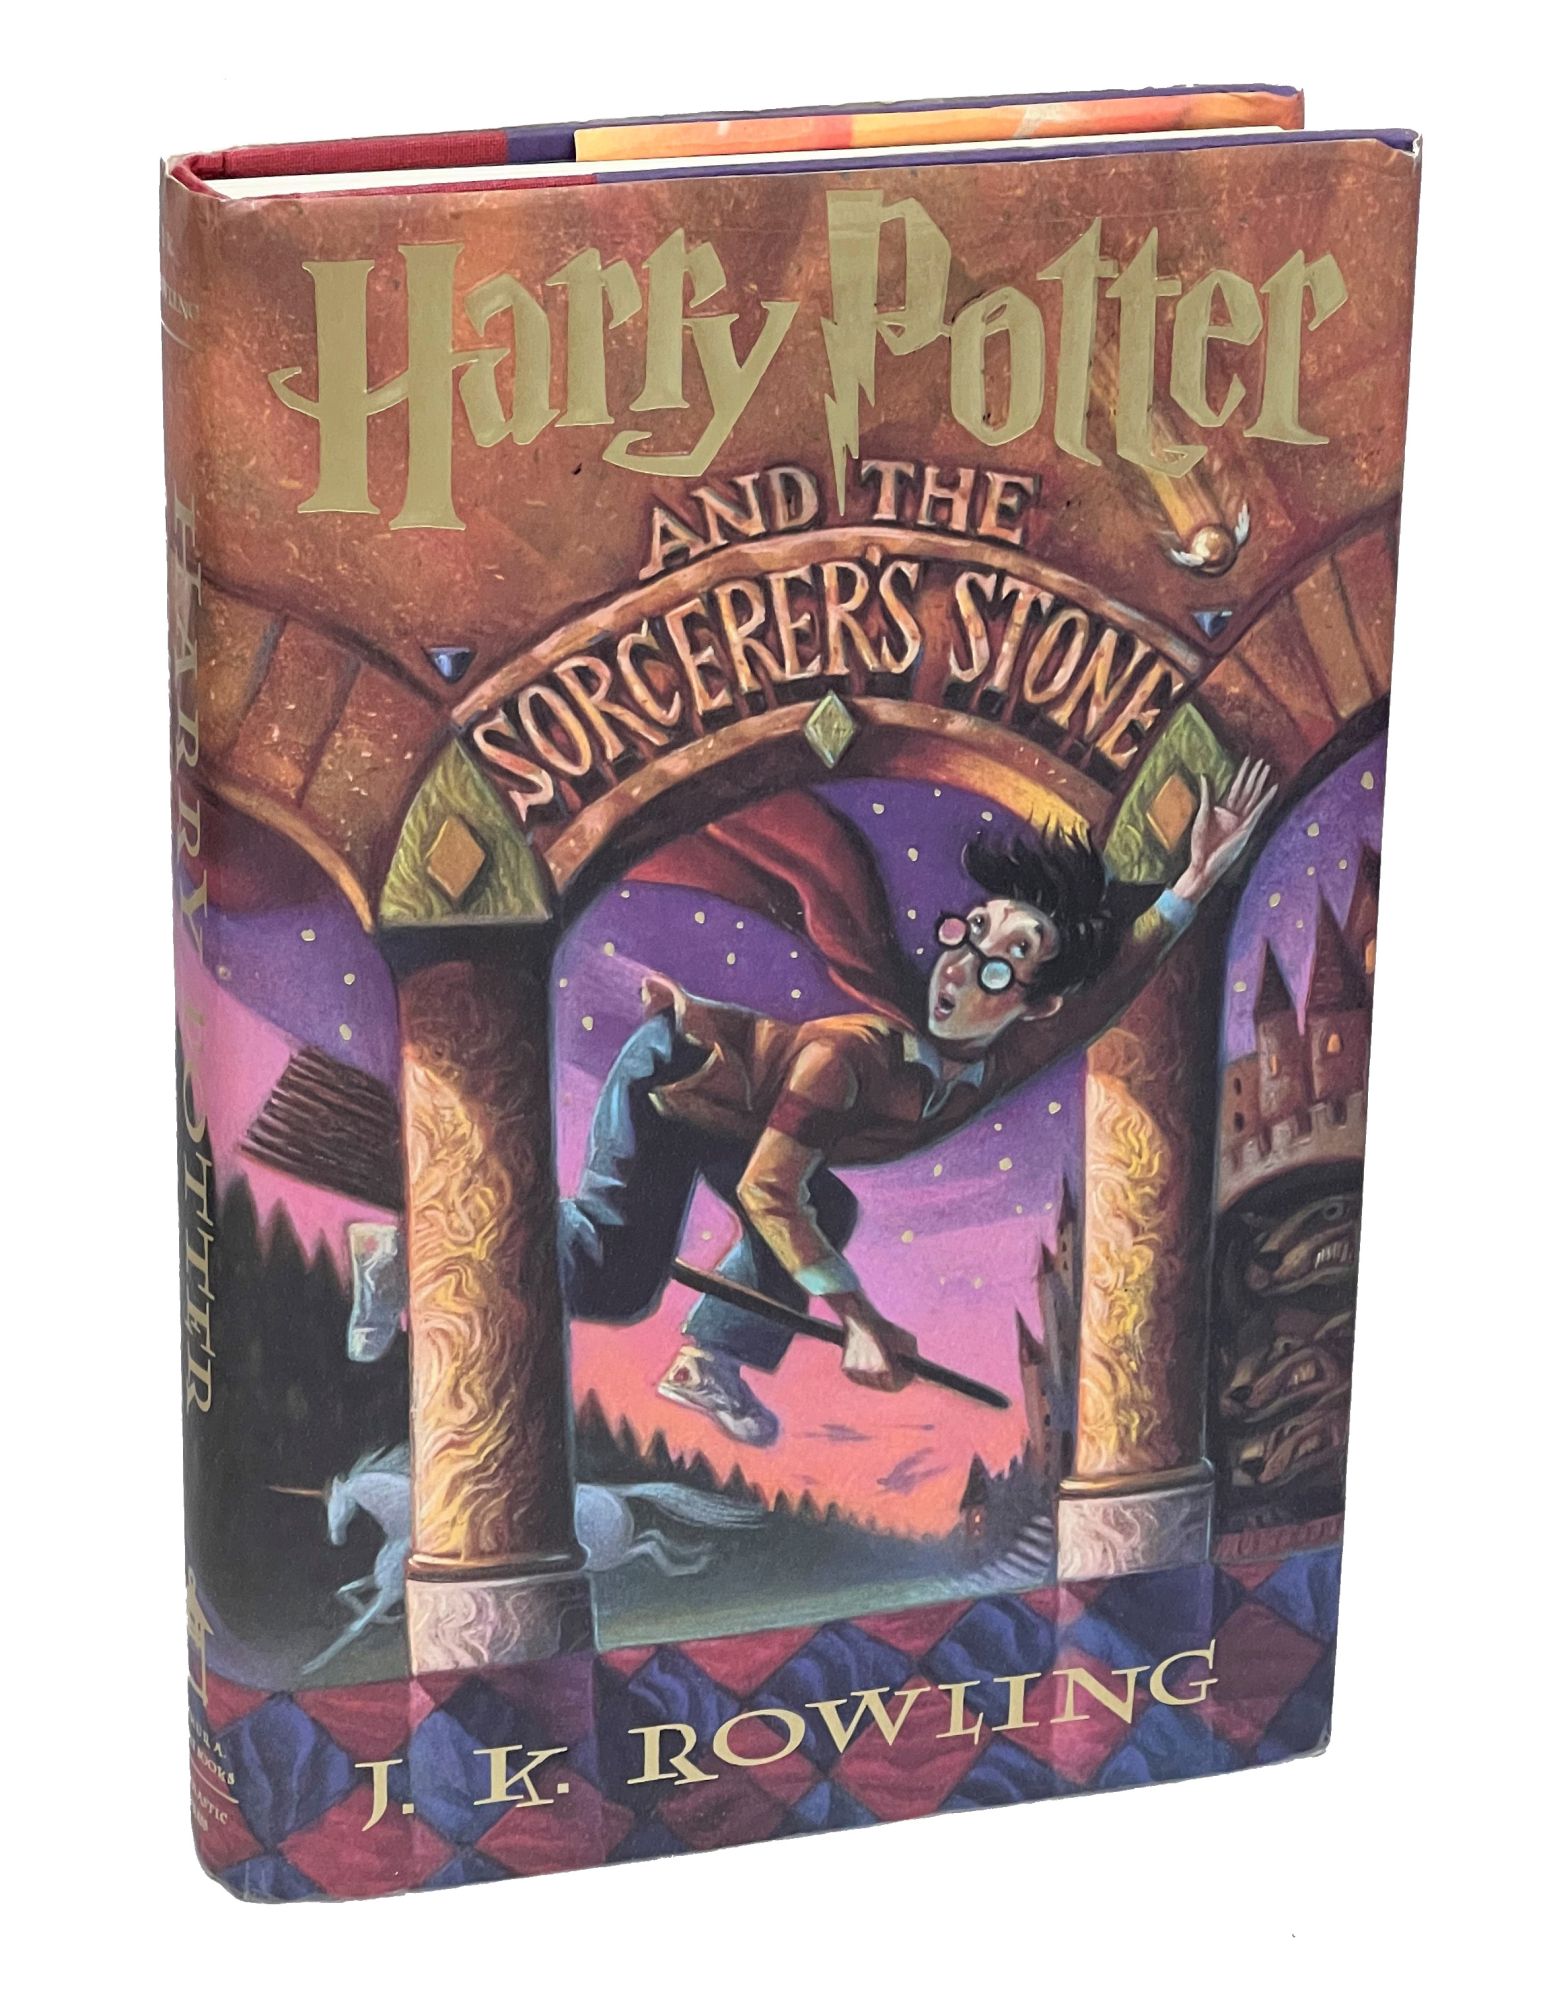 and　K.　Rowling　the　Sorcerer's　Edition　Stone　Potter　First　American　Harry　J.